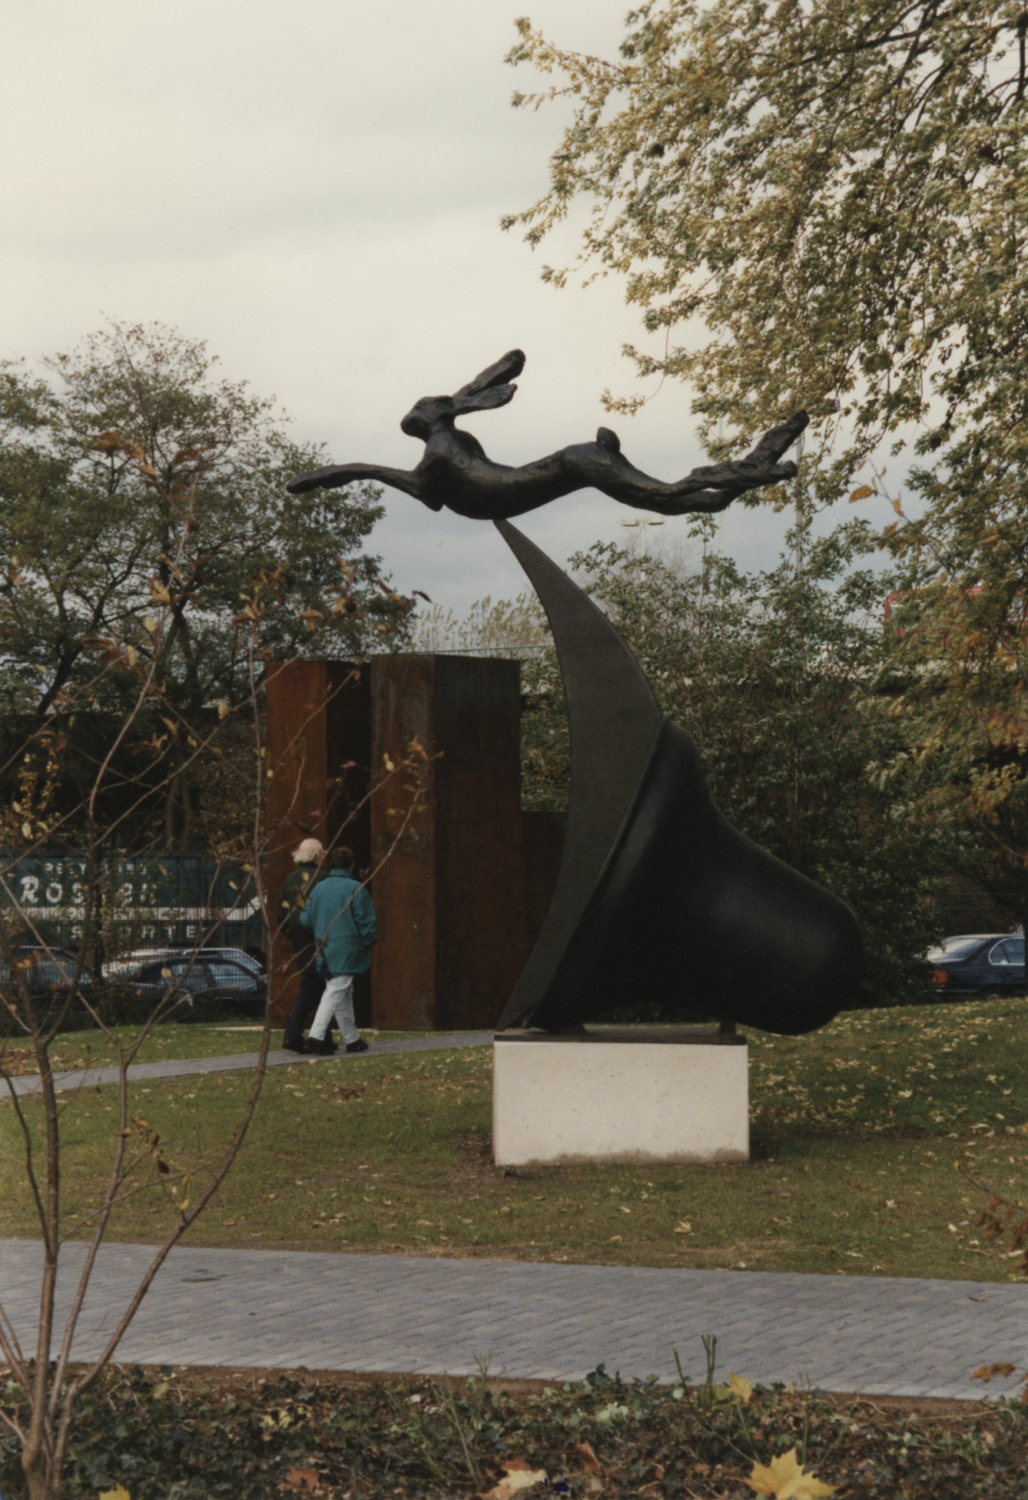 Leaping Hare on Crescent and Bell, 1983